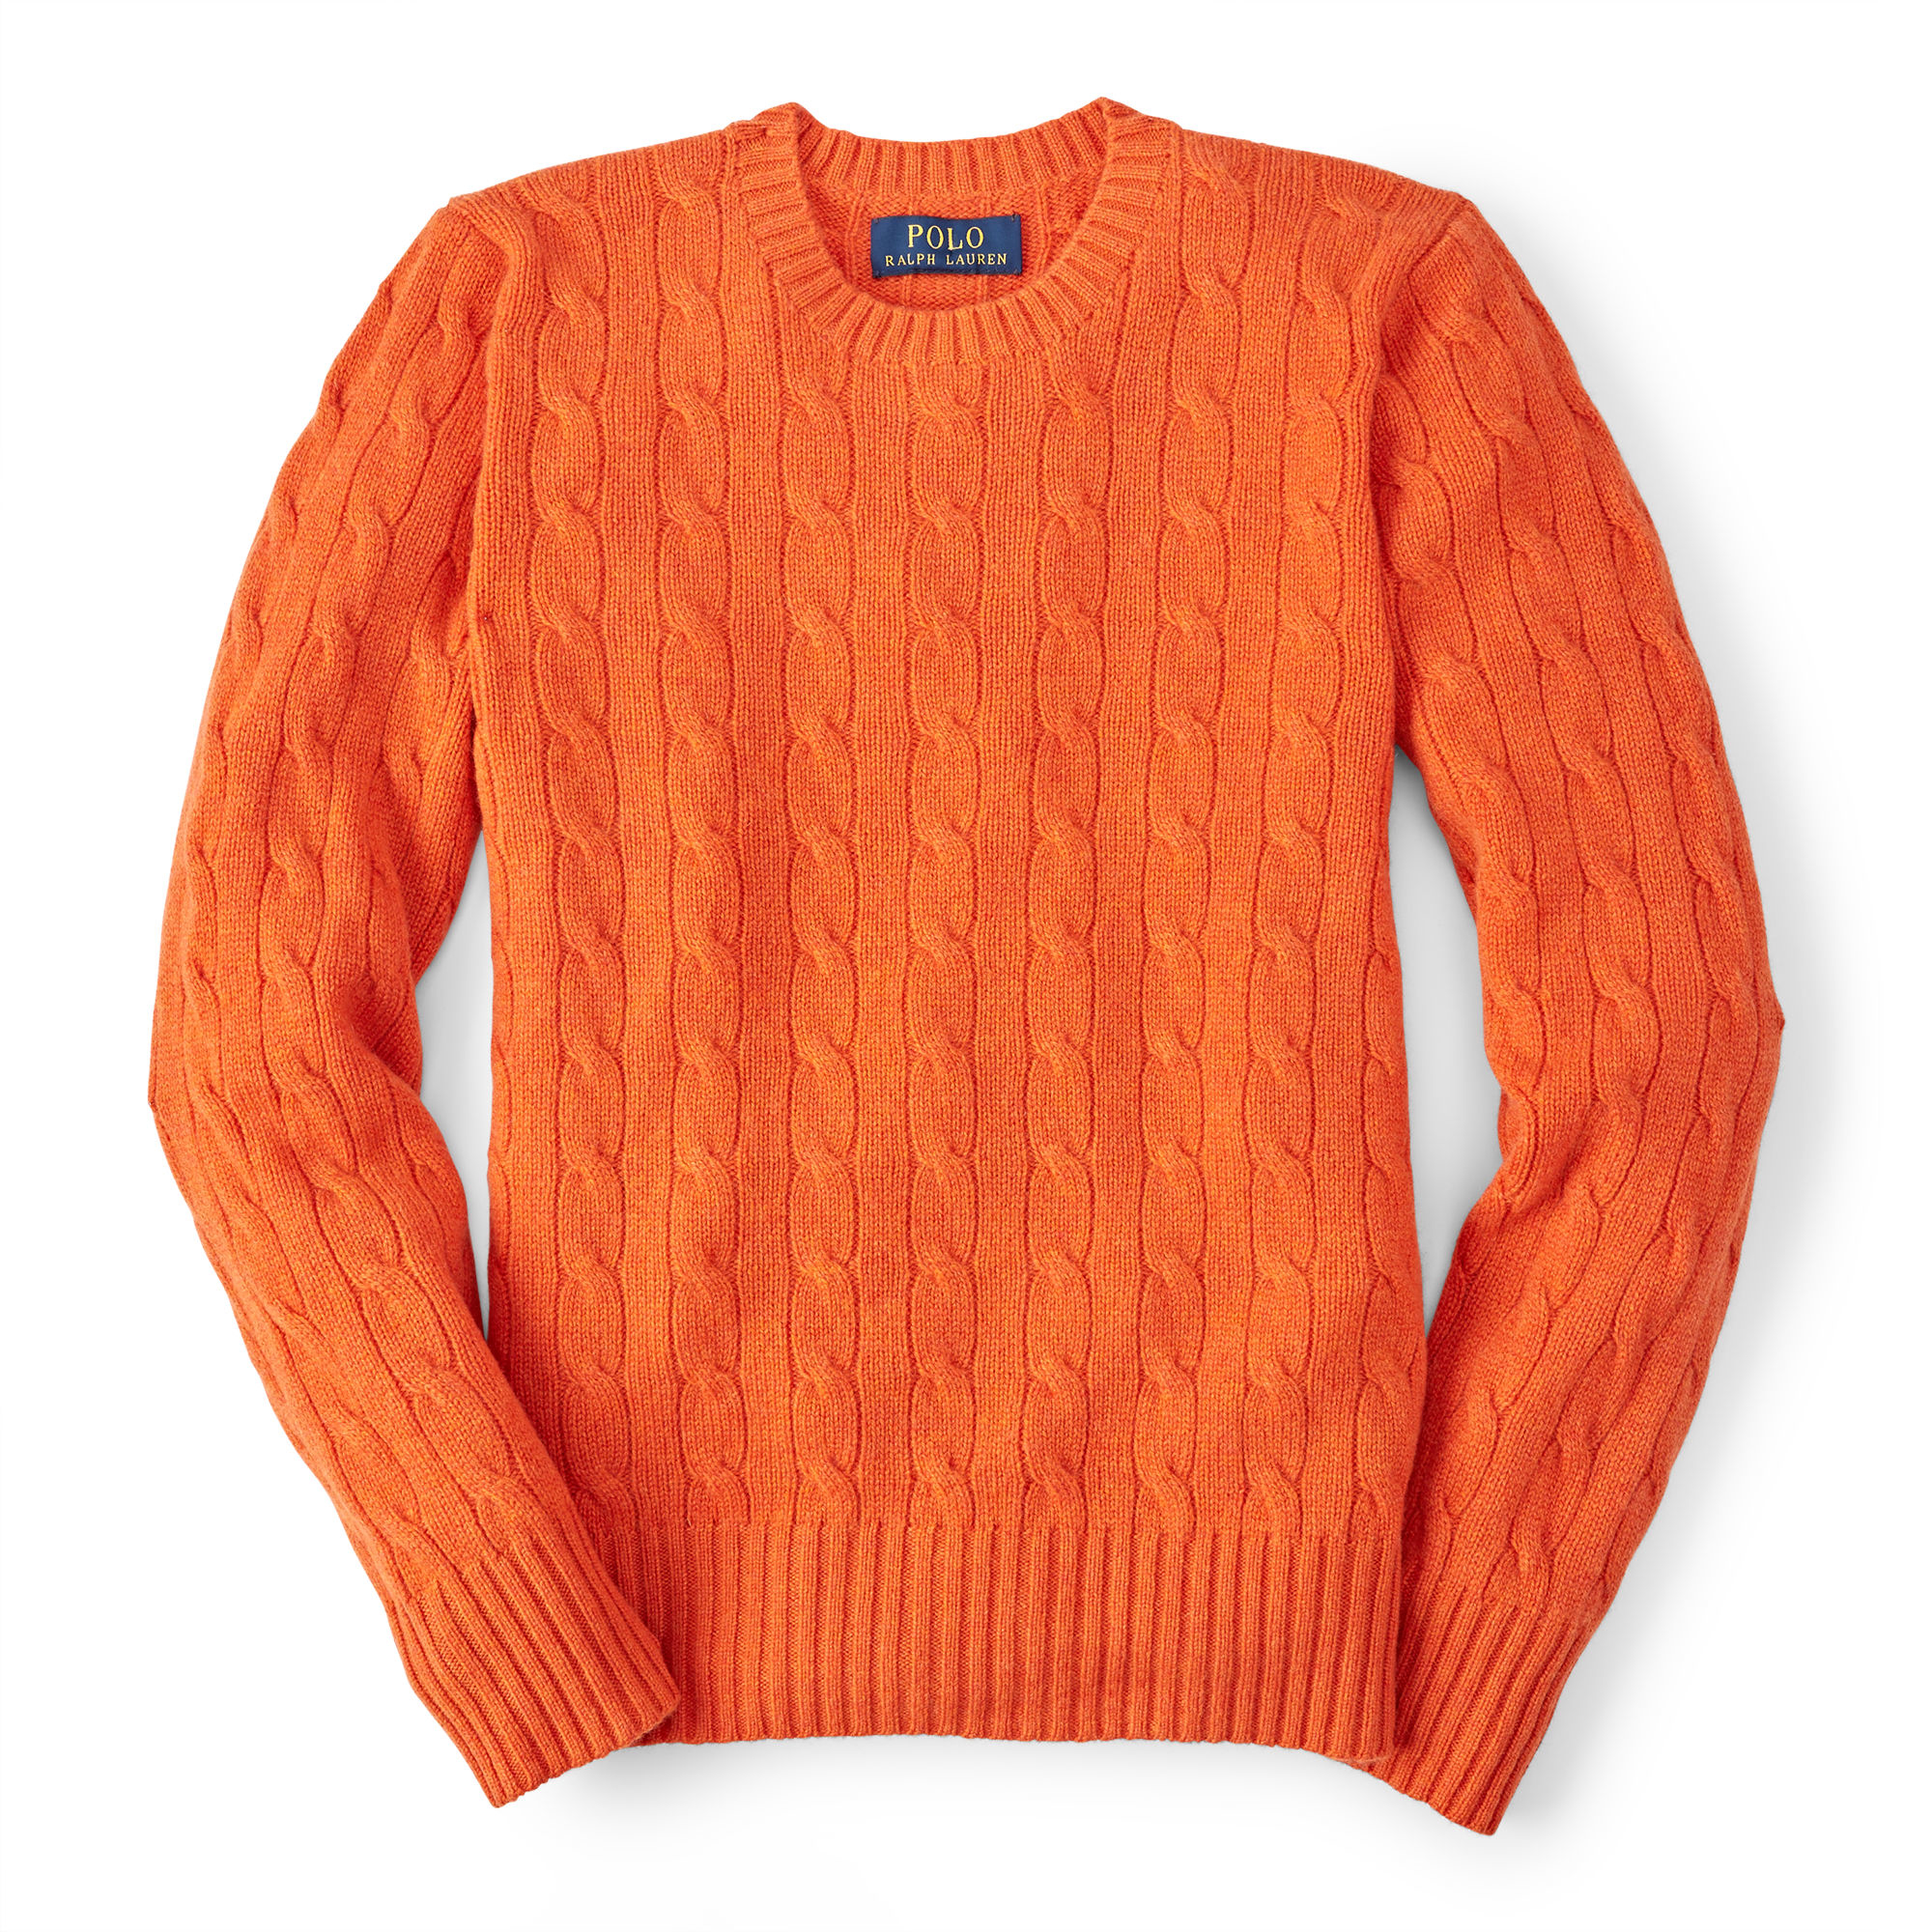 Ralph Lauren Cable-knit Cashmere Sweater in Orange - Lyst